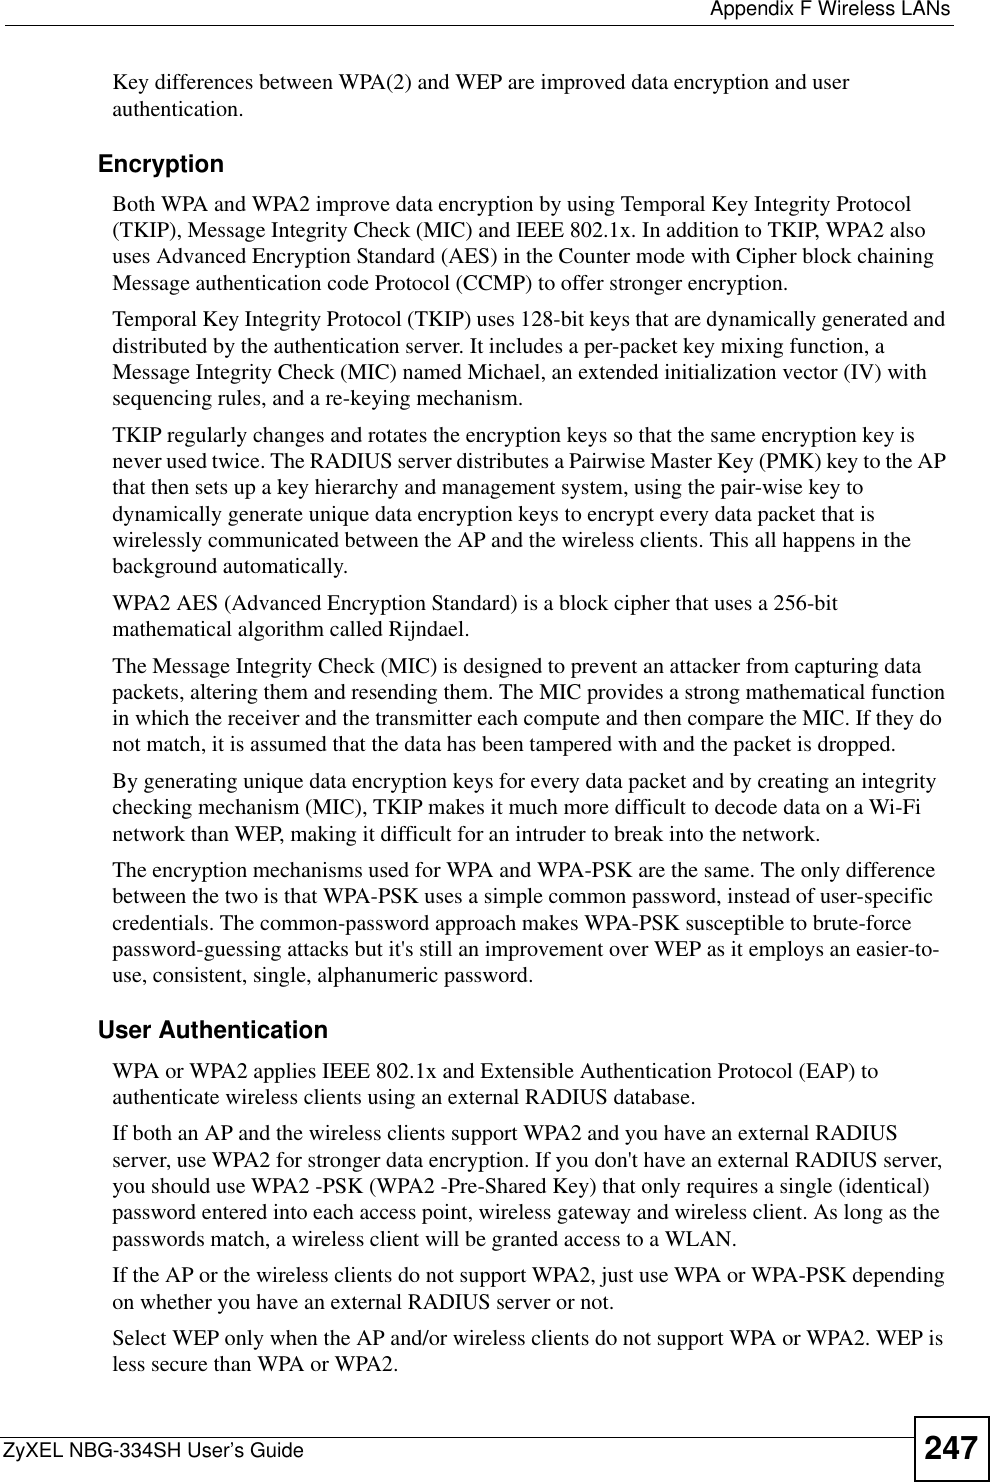  Appendix F Wireless LANsZyXEL NBG-334SH User’s Guide 247Key differences between WPA(2) and WEP are improved data encryption and user authentication.    EncryptionBoth WPA and WPA2 improve data encryption by using Temporal Key Integrity Protocol (TKIP), Message Integrity Check (MIC) and IEEE 802.1x. In addition to TKIP, WPA2 also uses Advanced Encryption Standard (AES) in the Counter mode with Cipher block chaining Message authentication code Protocol (CCMP) to offer stronger encryption. Temporal Key Integrity Protocol (TKIP) uses 128-bit keys that are dynamically generated and distributed by the authentication server. It includes a per-packet key mixing function, a Message Integrity Check (MIC) named Michael, an extended initialization vector (IV) with sequencing rules, and a re-keying mechanism.TKIP regularly changes and rotates the encryption keys so that the same encryption key is never used twice. The RADIUS server distributes a Pairwise Master Key (PMK) key to the AP that then sets up a key hierarchy and management system, using the pair-wise key to dynamically generate unique data encryption keys to encrypt every data packet that is wirelessly communicated between the AP and the wireless clients. This all happens in the background automatically.WPA2 AES (Advanced Encryption Standard) is a block cipher that uses a 256-bit mathematical algorithm called Rijndael.The Message Integrity Check (MIC) is designed to prevent an attacker from capturing data packets, altering them and resending them. The MIC provides a strong mathematical function in which the receiver and the transmitter each compute and then compare the MIC. If they do not match, it is assumed that the data has been tampered with and the packet is dropped. By generating unique data encryption keys for every data packet and by creating an integrity checking mechanism (MIC), TKIP makes it much more difficult to decode data on a Wi-Fi network than WEP, making it difficult for an intruder to break into the network. The encryption mechanisms used for WPA and WPA-PSK are the same. The only difference between the two is that WPA-PSK uses a simple common password, instead of user-specific credentials. The common-password approach makes WPA-PSK susceptible to brute-force password-guessing attacks but it&apos;s still an improvement over WEP as it employs an easier-to-use, consistent, single, alphanumeric password.  User AuthenticationWPA or WPA2 applies IEEE 802.1x and Extensible Authentication Protocol (EAP) to authenticate wireless clients using an external RADIUS database. If both an AP and the wireless clients support WPA2 and you have an external RADIUS server, use WPA2 for stronger data encryption. If you don&apos;t have an external RADIUS server, you should use WPA2 -PSK (WPA2 -Pre-Shared Key) that only requires a single (identical) password entered into each access point, wireless gateway and wireless client. As long as the passwords match, a wireless client will be granted access to a WLAN. If the AP or the wireless clients do not support WPA2, just use WPA or WPA-PSK depending on whether you have an external RADIUS server or not.Select WEP only when the AP and/or wireless clients do not support WPA or WPA2. WEP is less secure than WPA or WPA2.